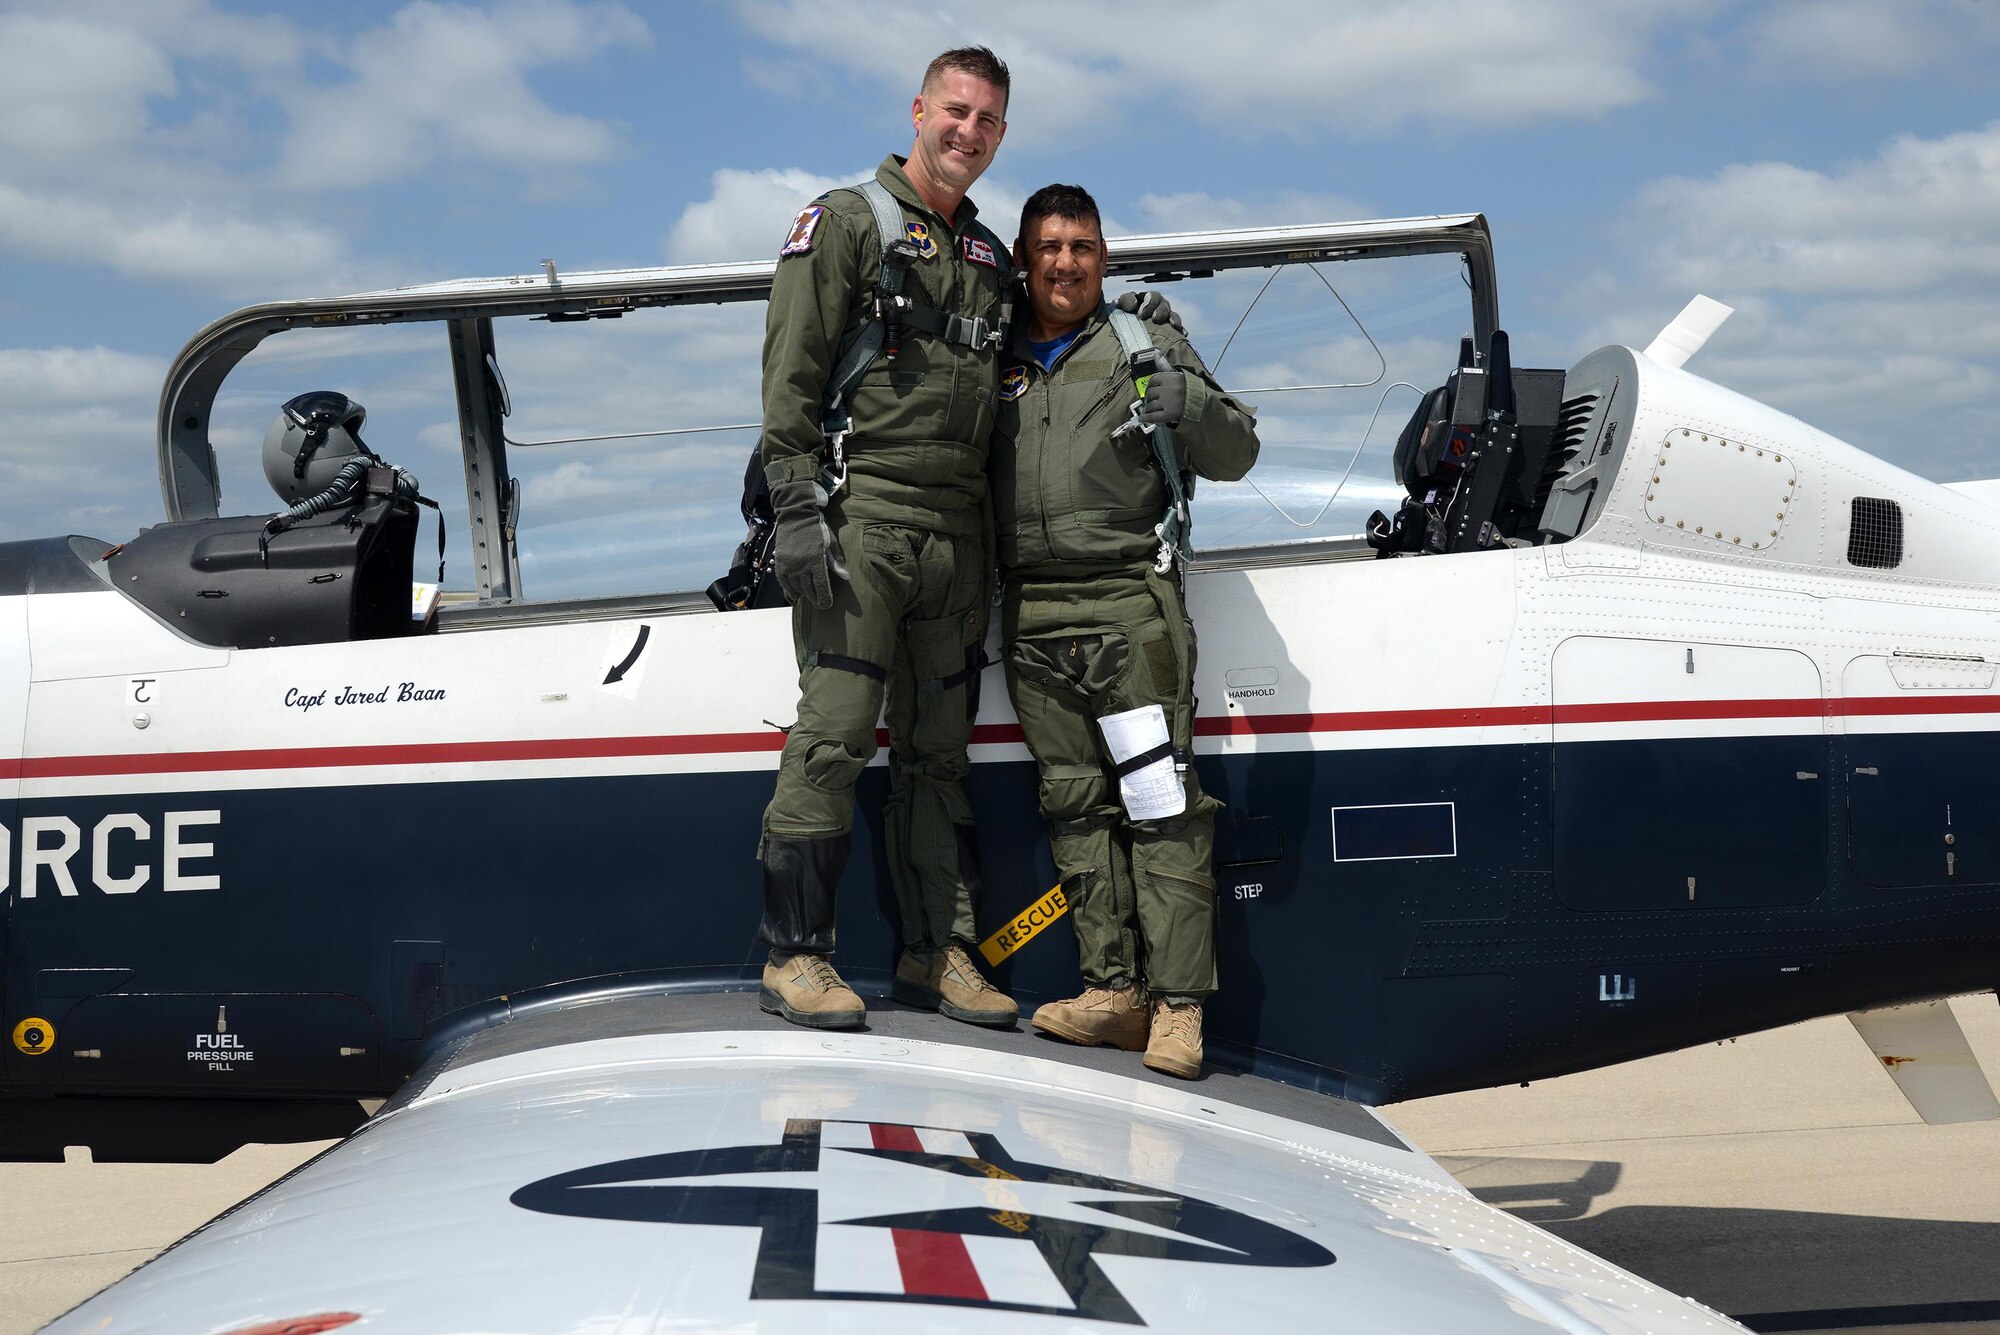 Lt. Col. Robert Moschella, 434th Flying Training Squadron commander poses for a photo with Jorge Hernandez, 47th Maintenance Directorate T-6 Texan II A-Cell crew chief, following an orientation flight, on Laughlin Air Force Base, Texas, May 20, 2016. Hernandez was awarded the first ever “Crew Chief of the Quarter” award for going above and beyond the call of duty. (U.S. Air Force photo/Airman 1st Class Brandon May)